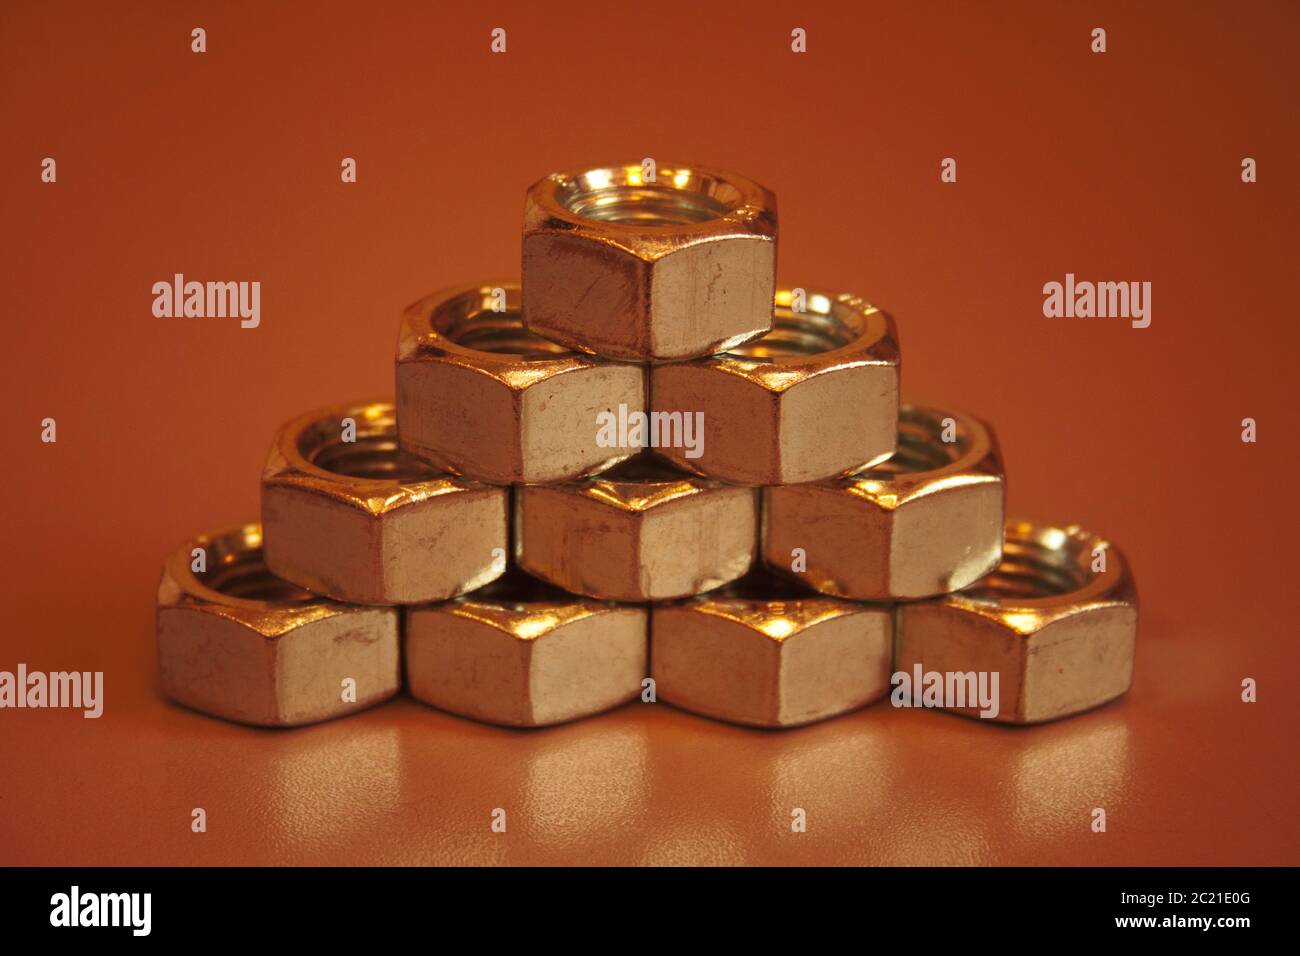 Pyramid from steel nuts on an orange-brown background. Stock Photo